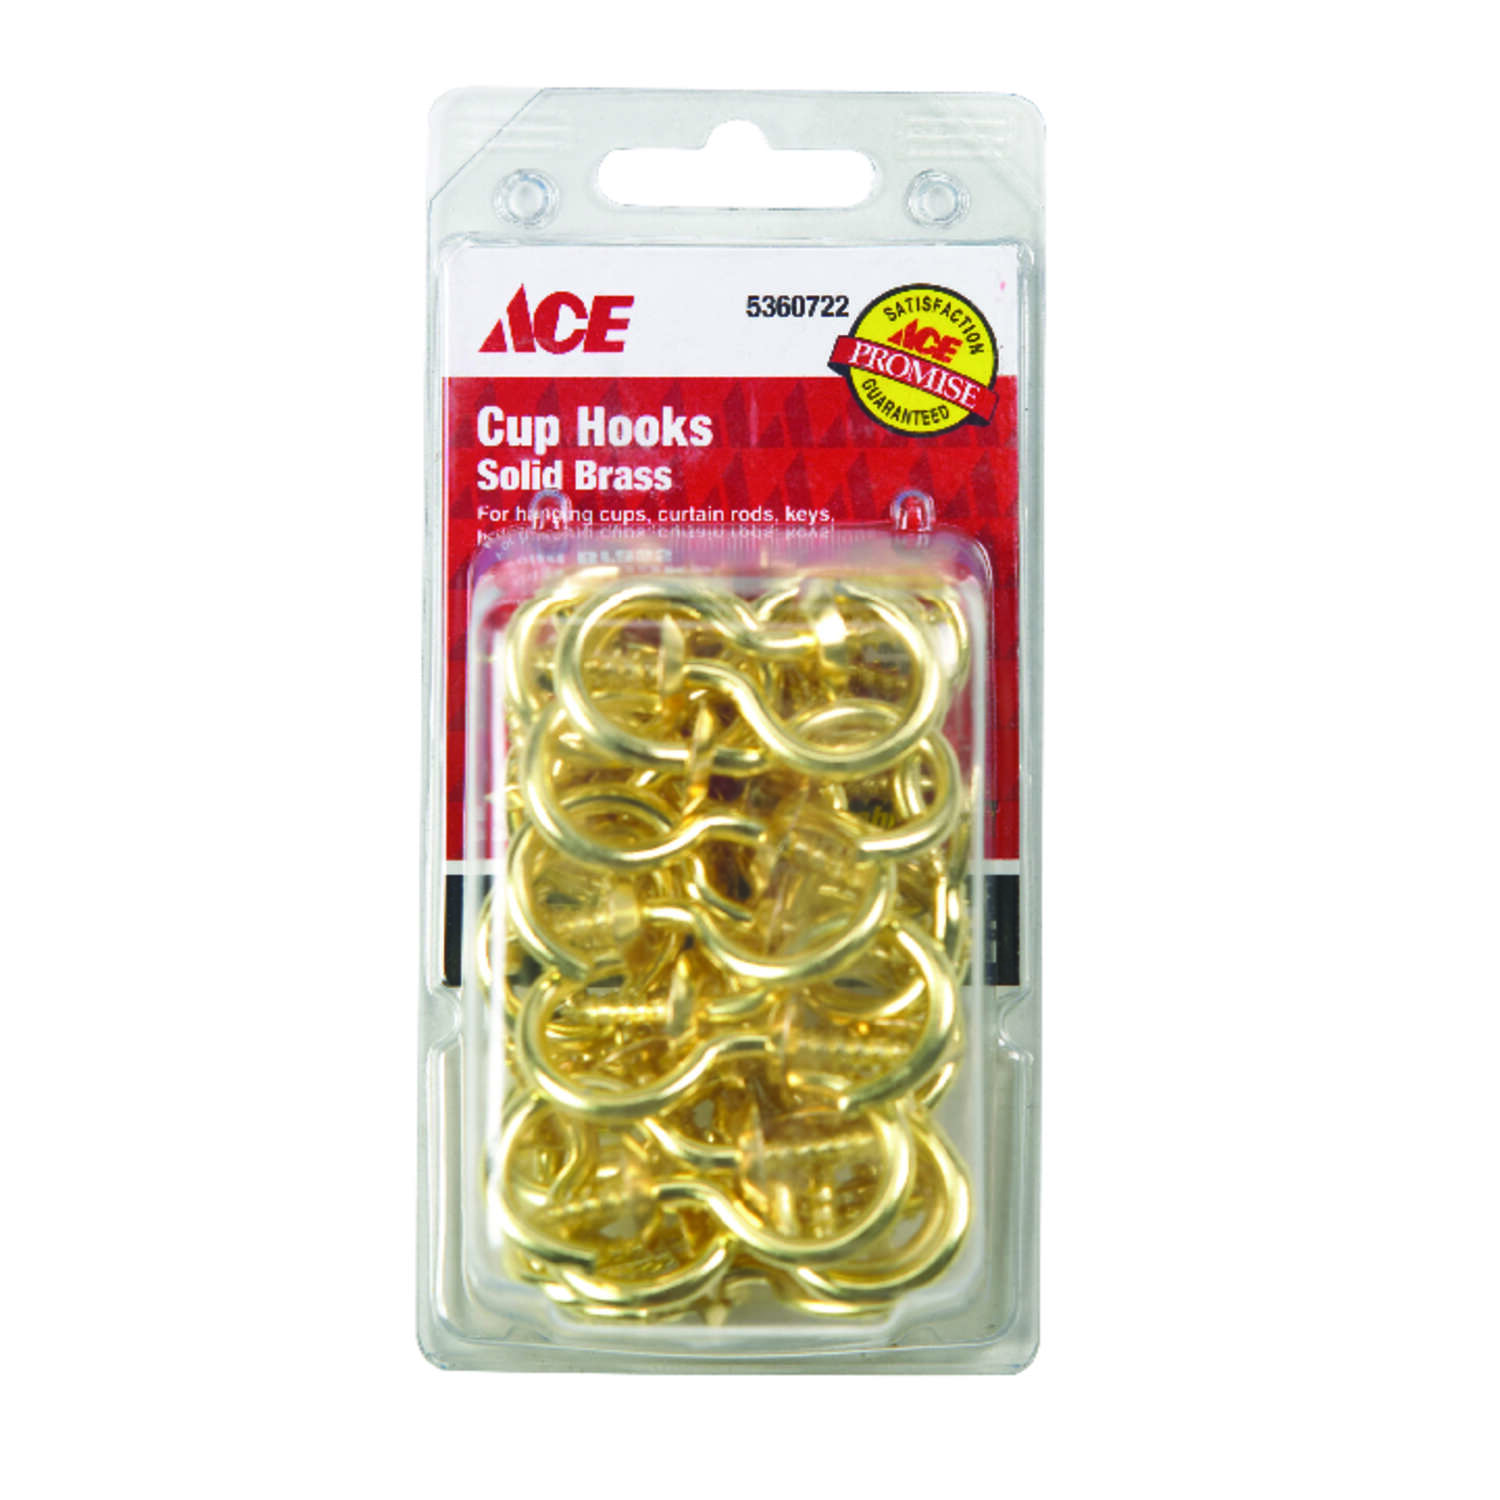 Stanley 75-9000 Solid Brass 1/2" Cup Hooks 12PK 